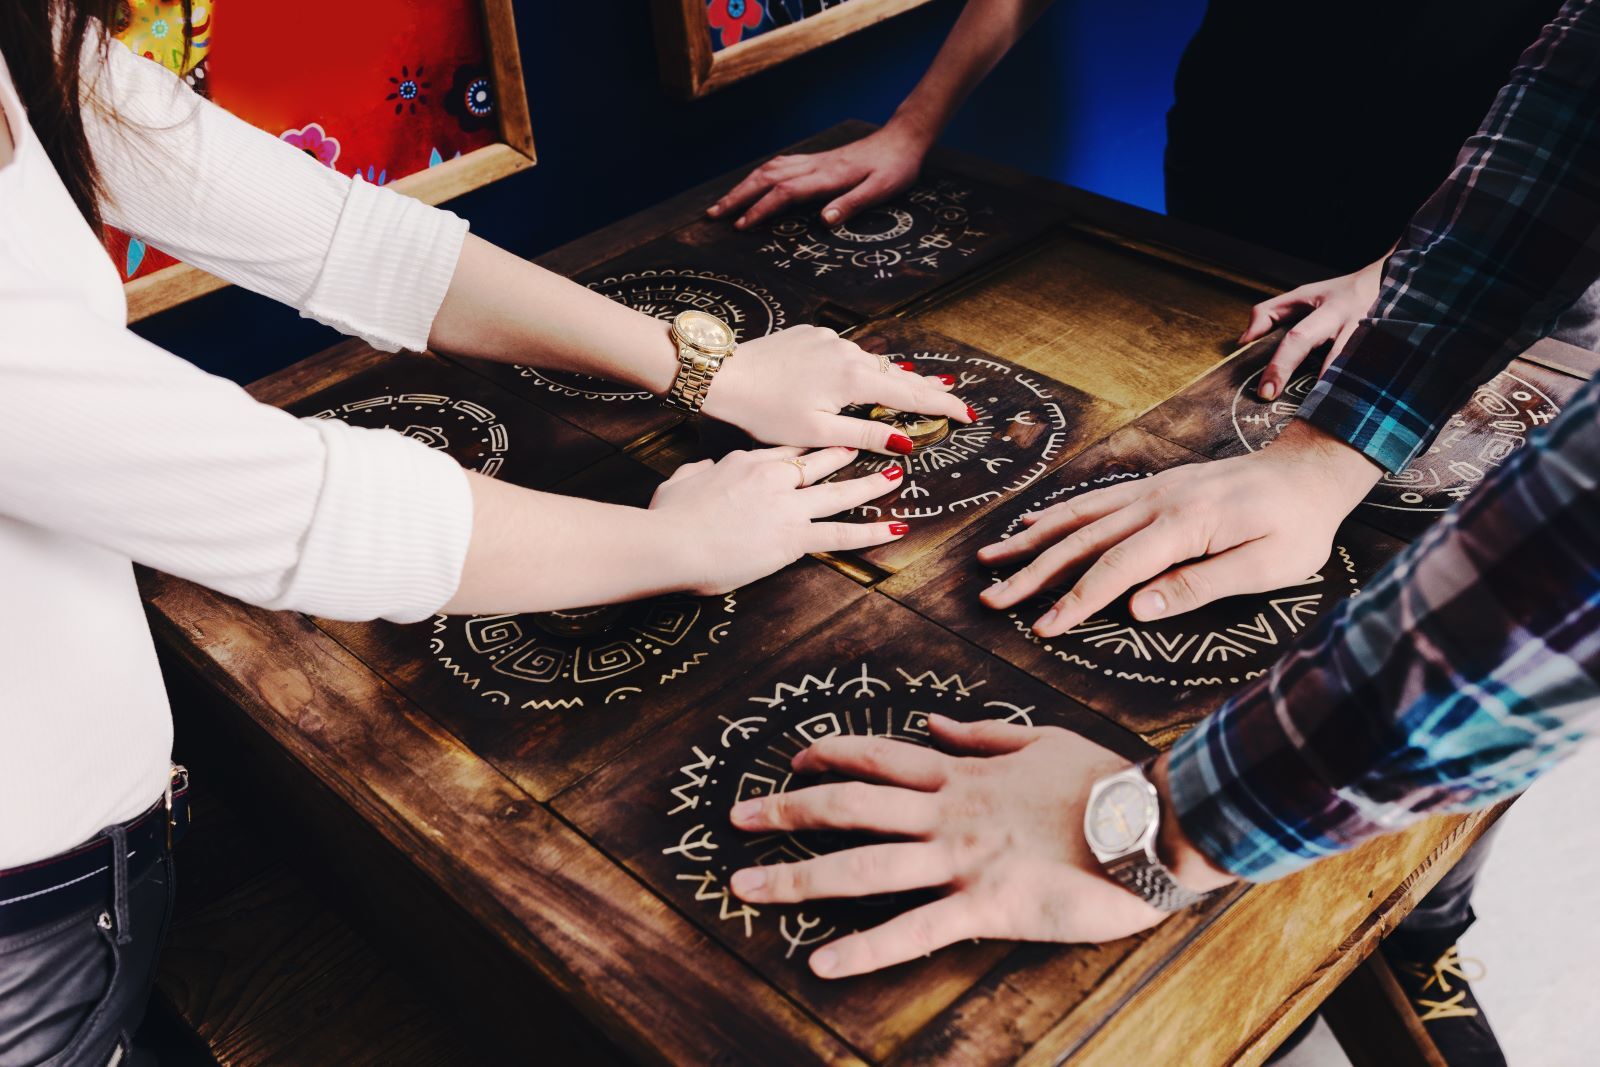 Three pairs of hands solve puzzles.